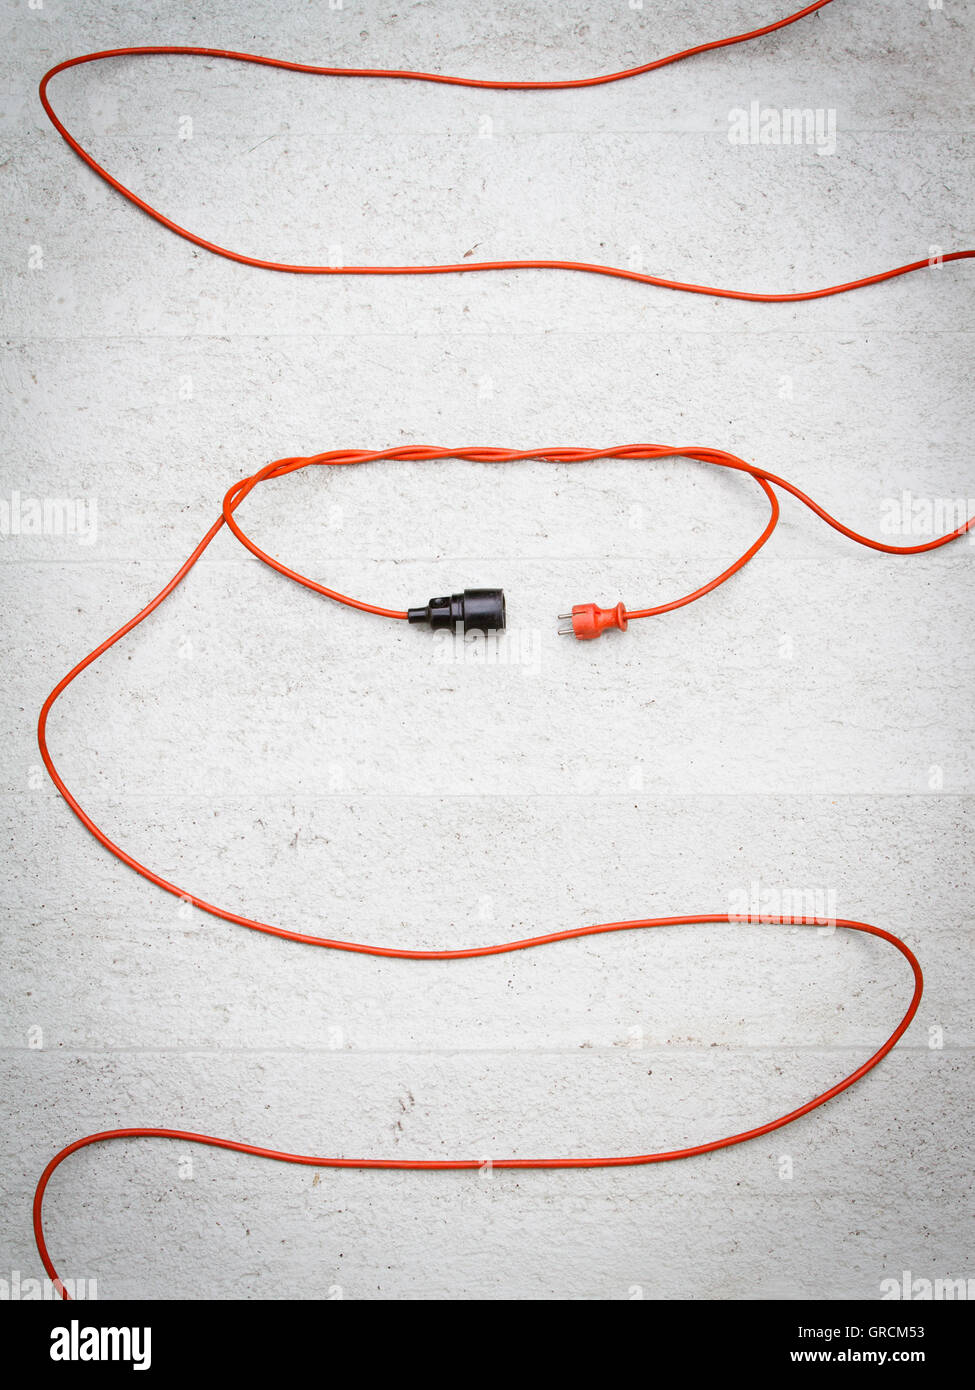 Electrifying Connection, Symbolically, Power Cord And Plug Stock Photo